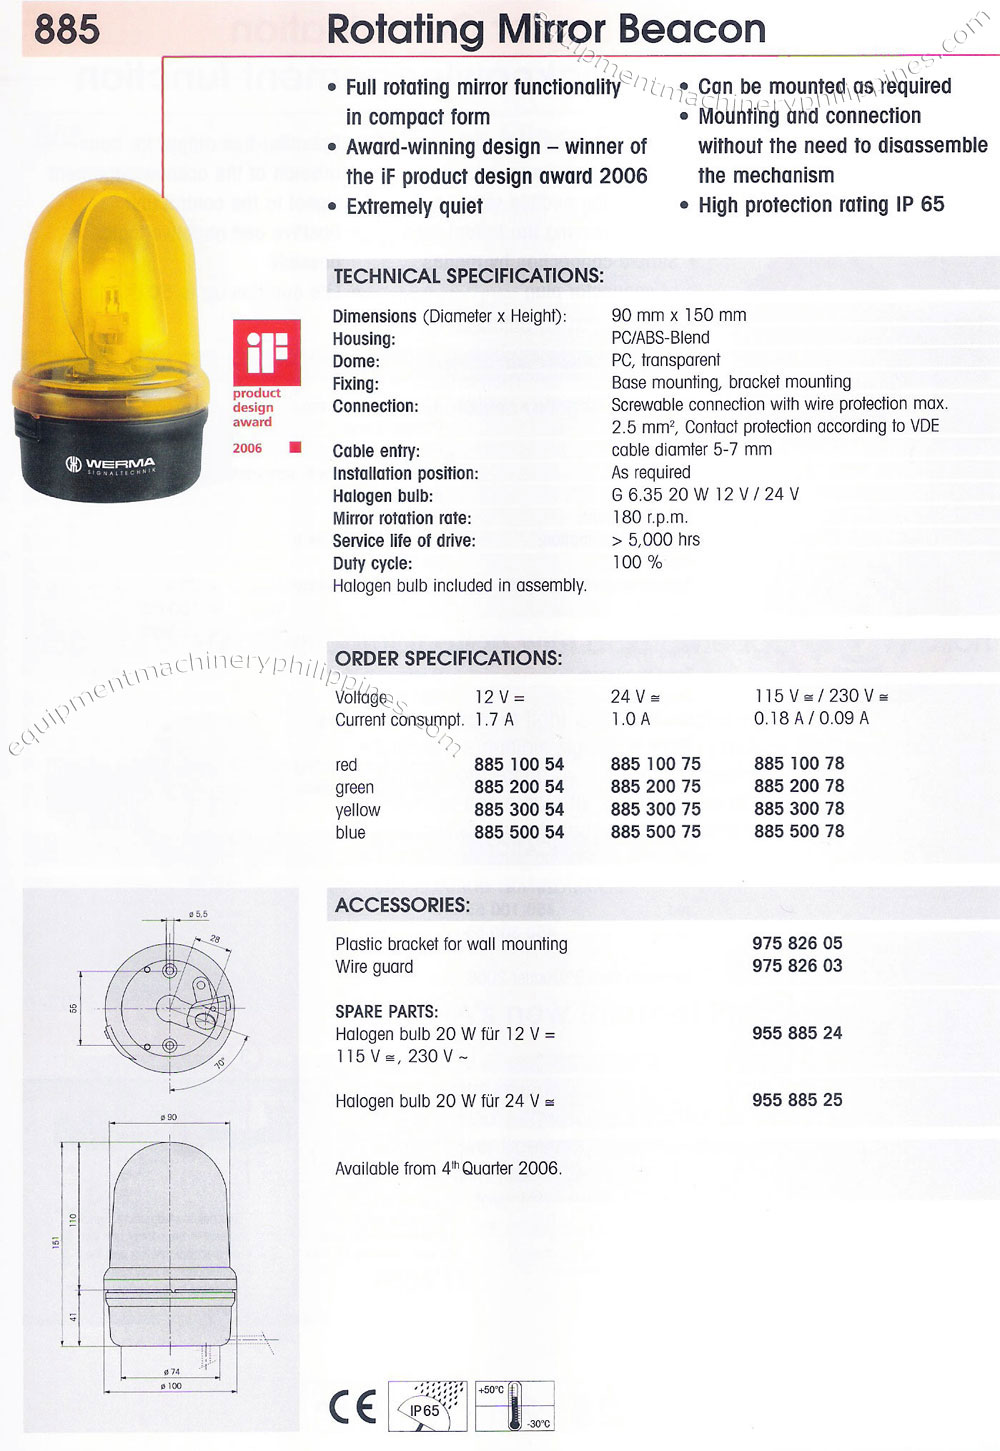 Werma Rotating Mirror Beacon Technical Specifications